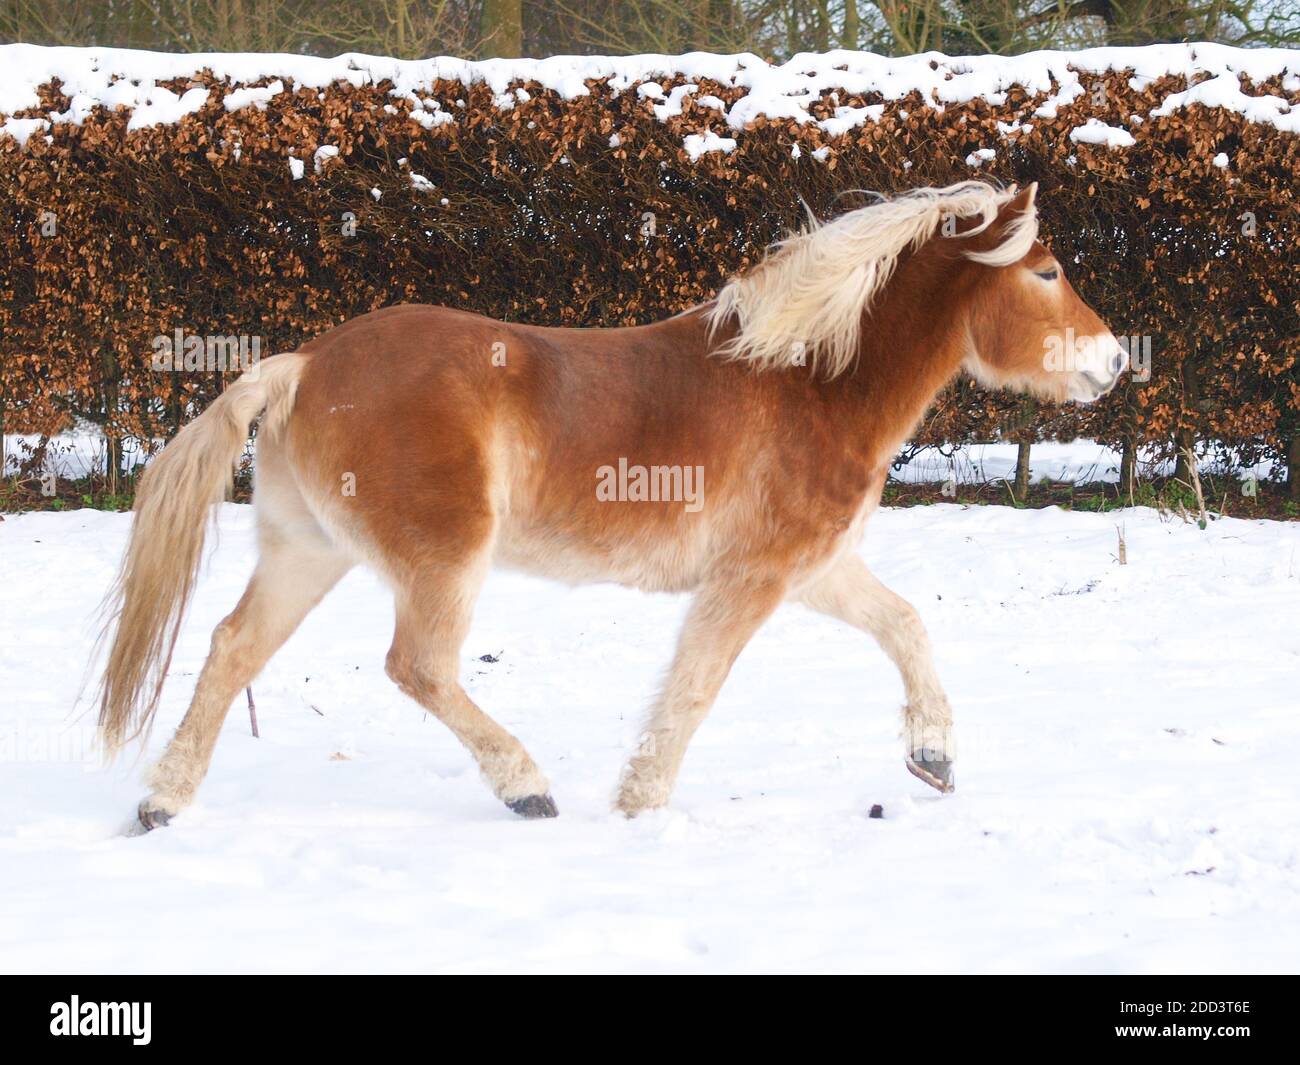 A Haflinger horse enjoys being at liberty in a snowy paddock. Stock Photo